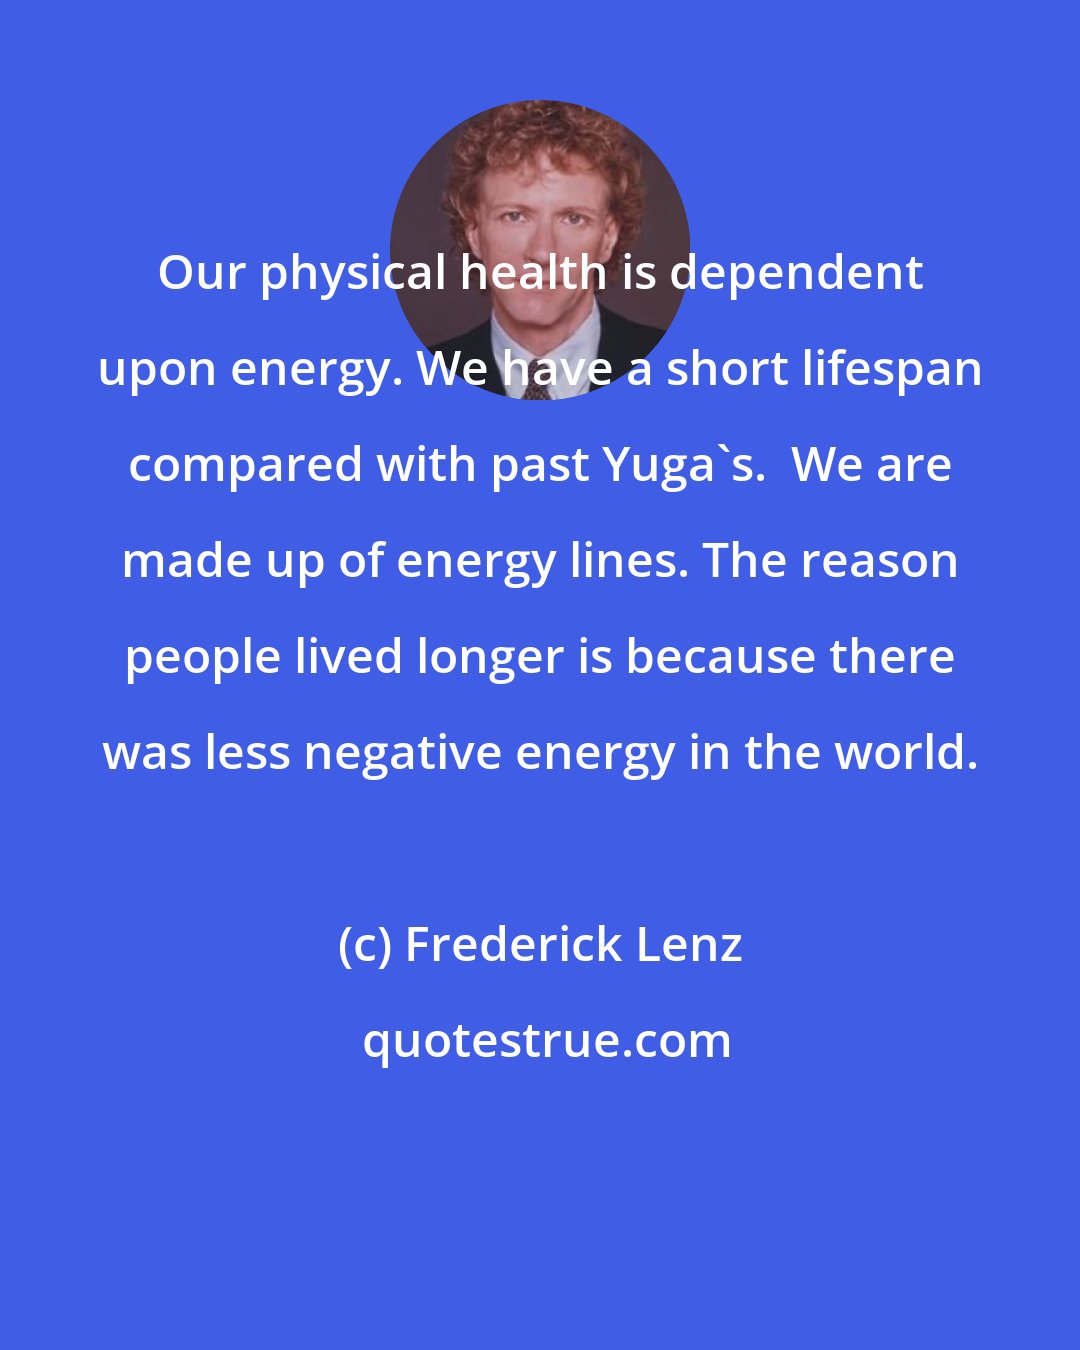 Frederick Lenz: Our physical health is dependent upon energy. We have a short lifespan compared with past Yuga's.  We are made up of energy lines. The reason people lived longer is because there was less negative energy in the world.